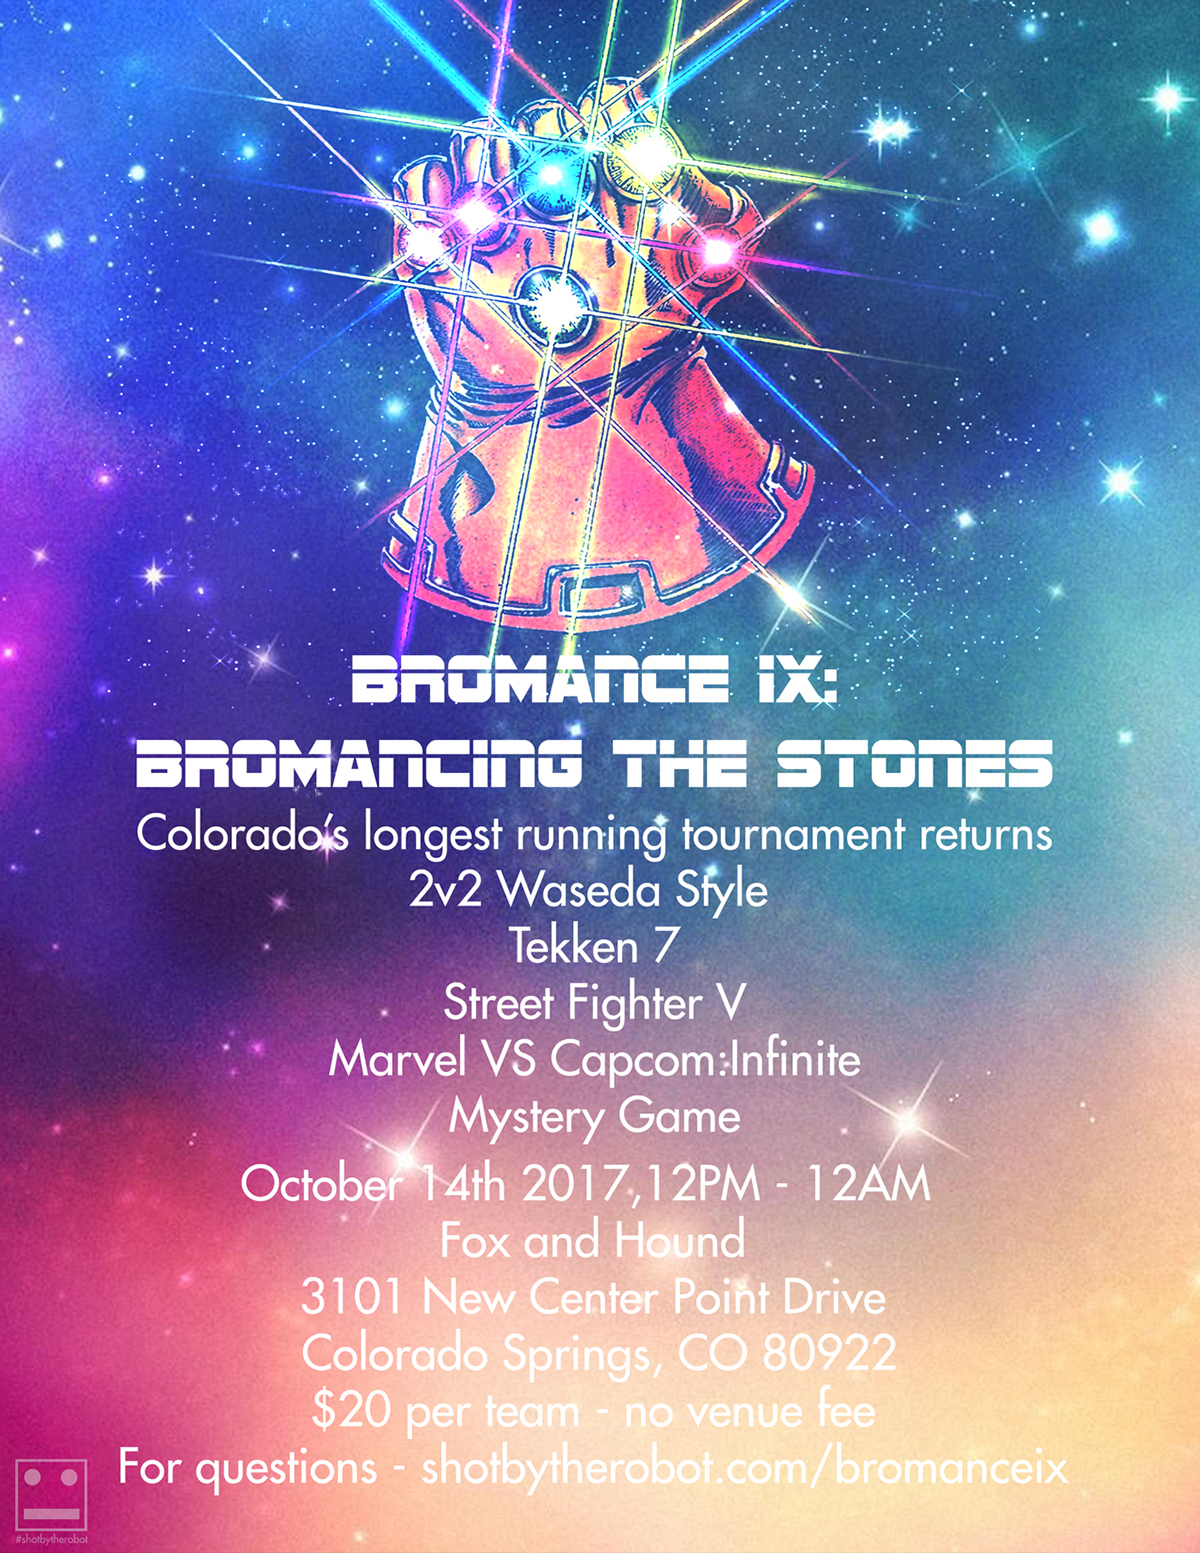 fighting games tournaments Events flyer photoshop bromance